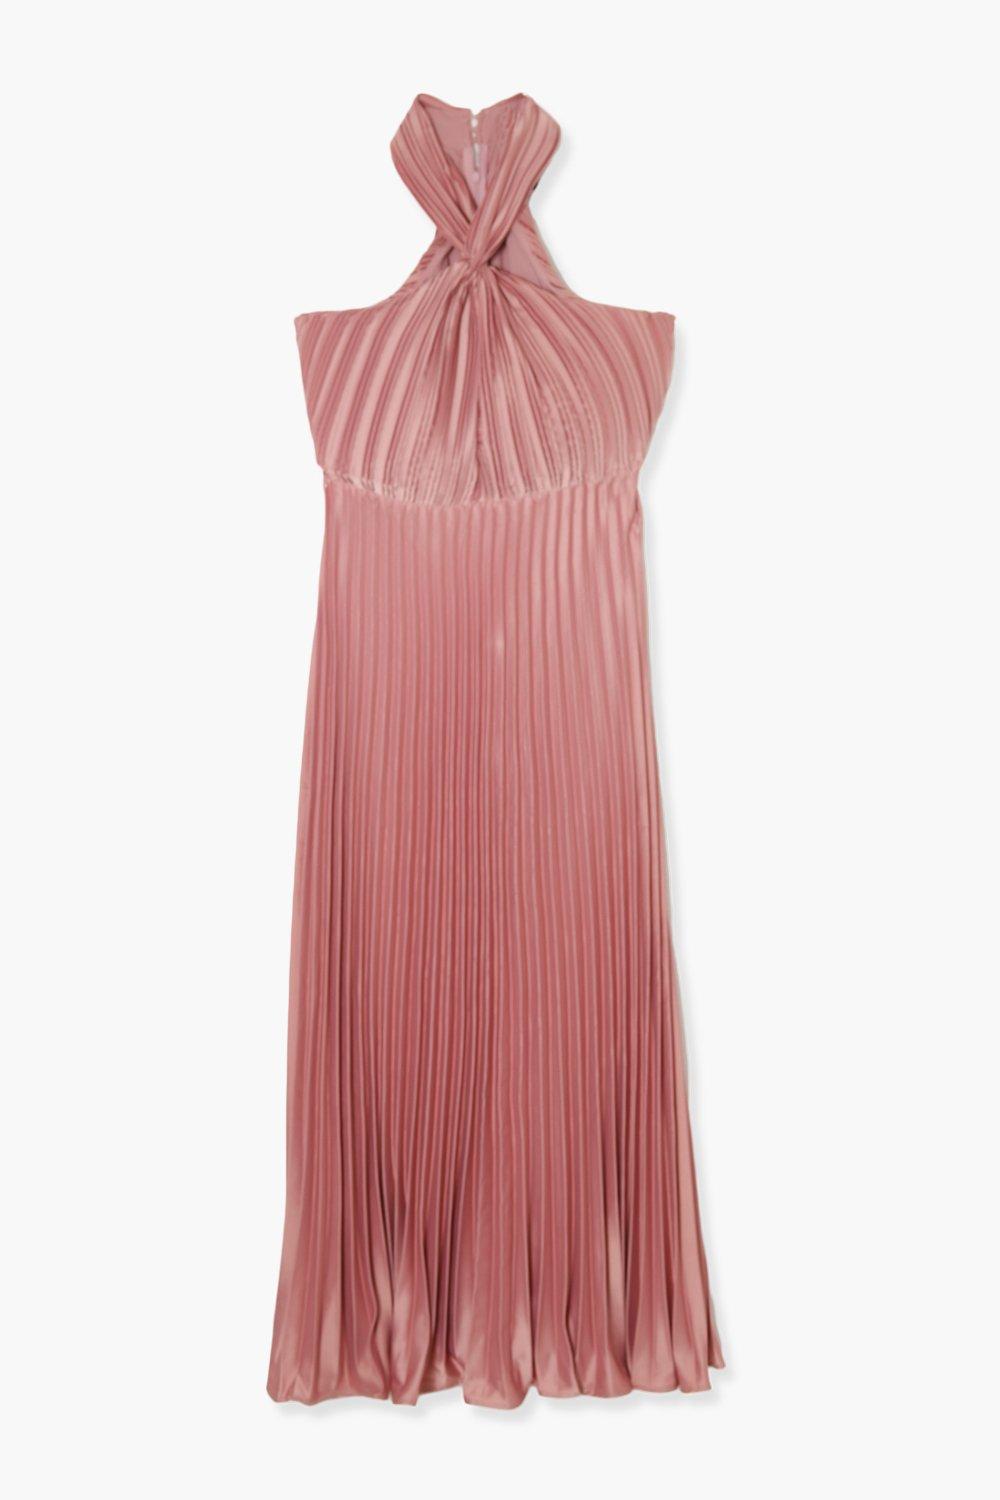 HerLipTo All Day Long Pleated Dress M